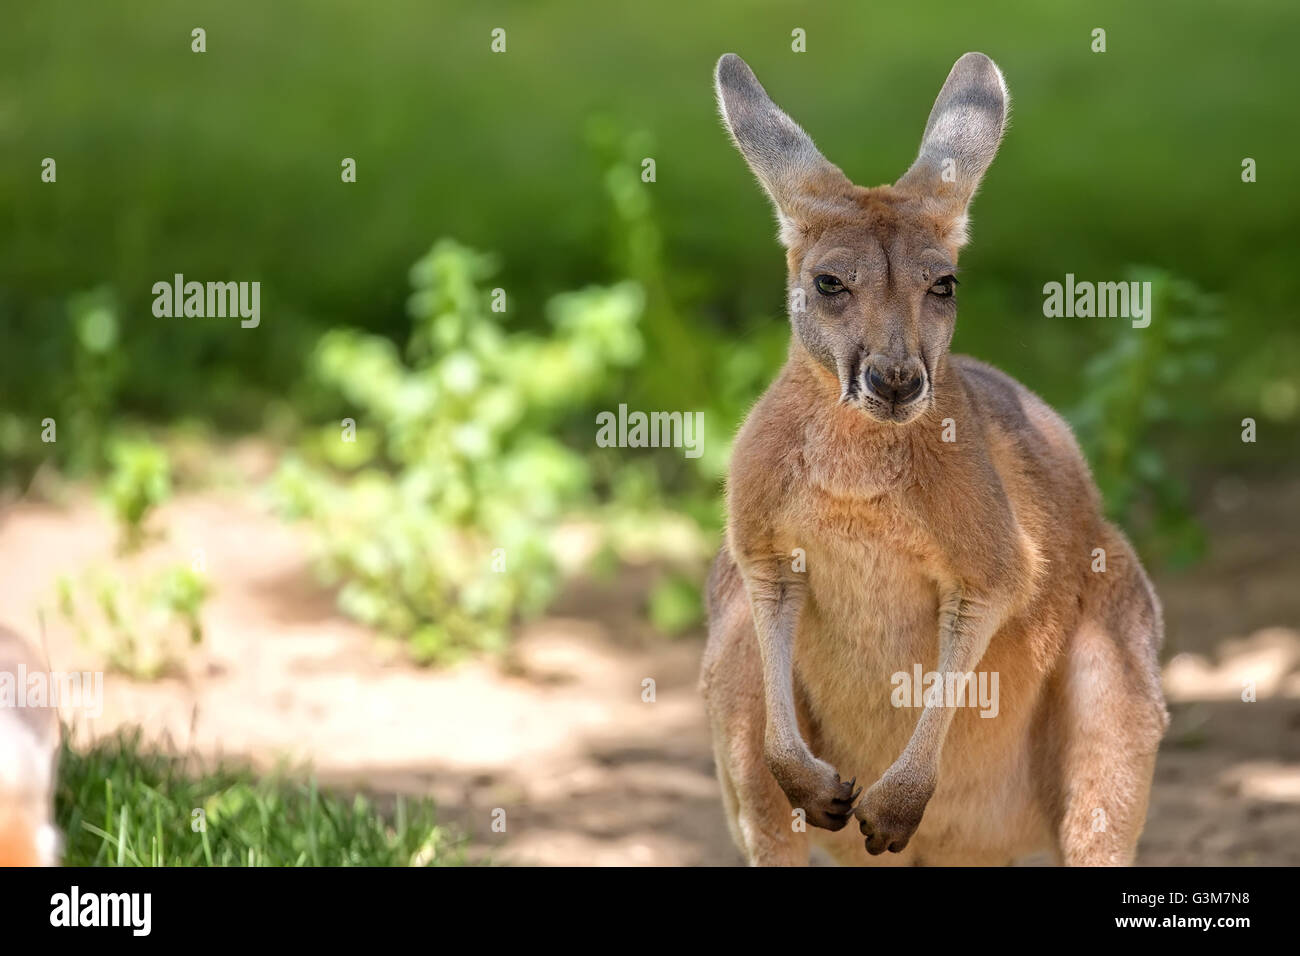 Kangaroo in the clearing, portrait Stock Photo